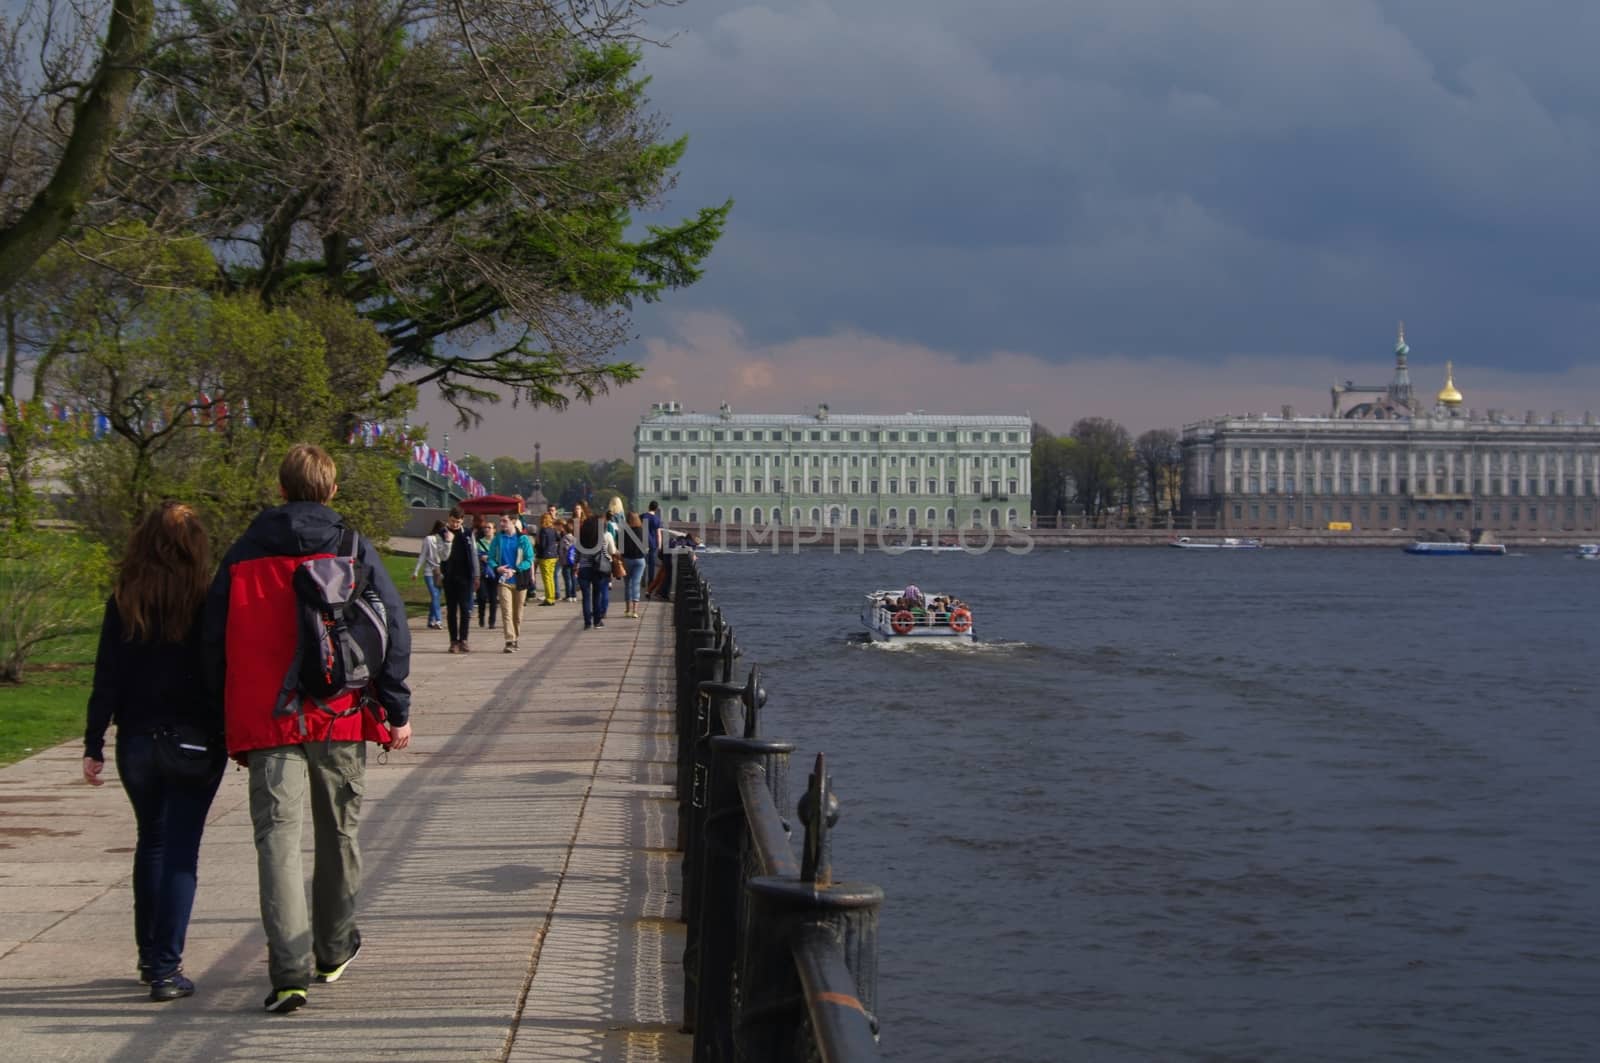 ST. PETERSBURG, RUSSIA, MAI 10, 2014: people are walking on a cl by evolutionnow